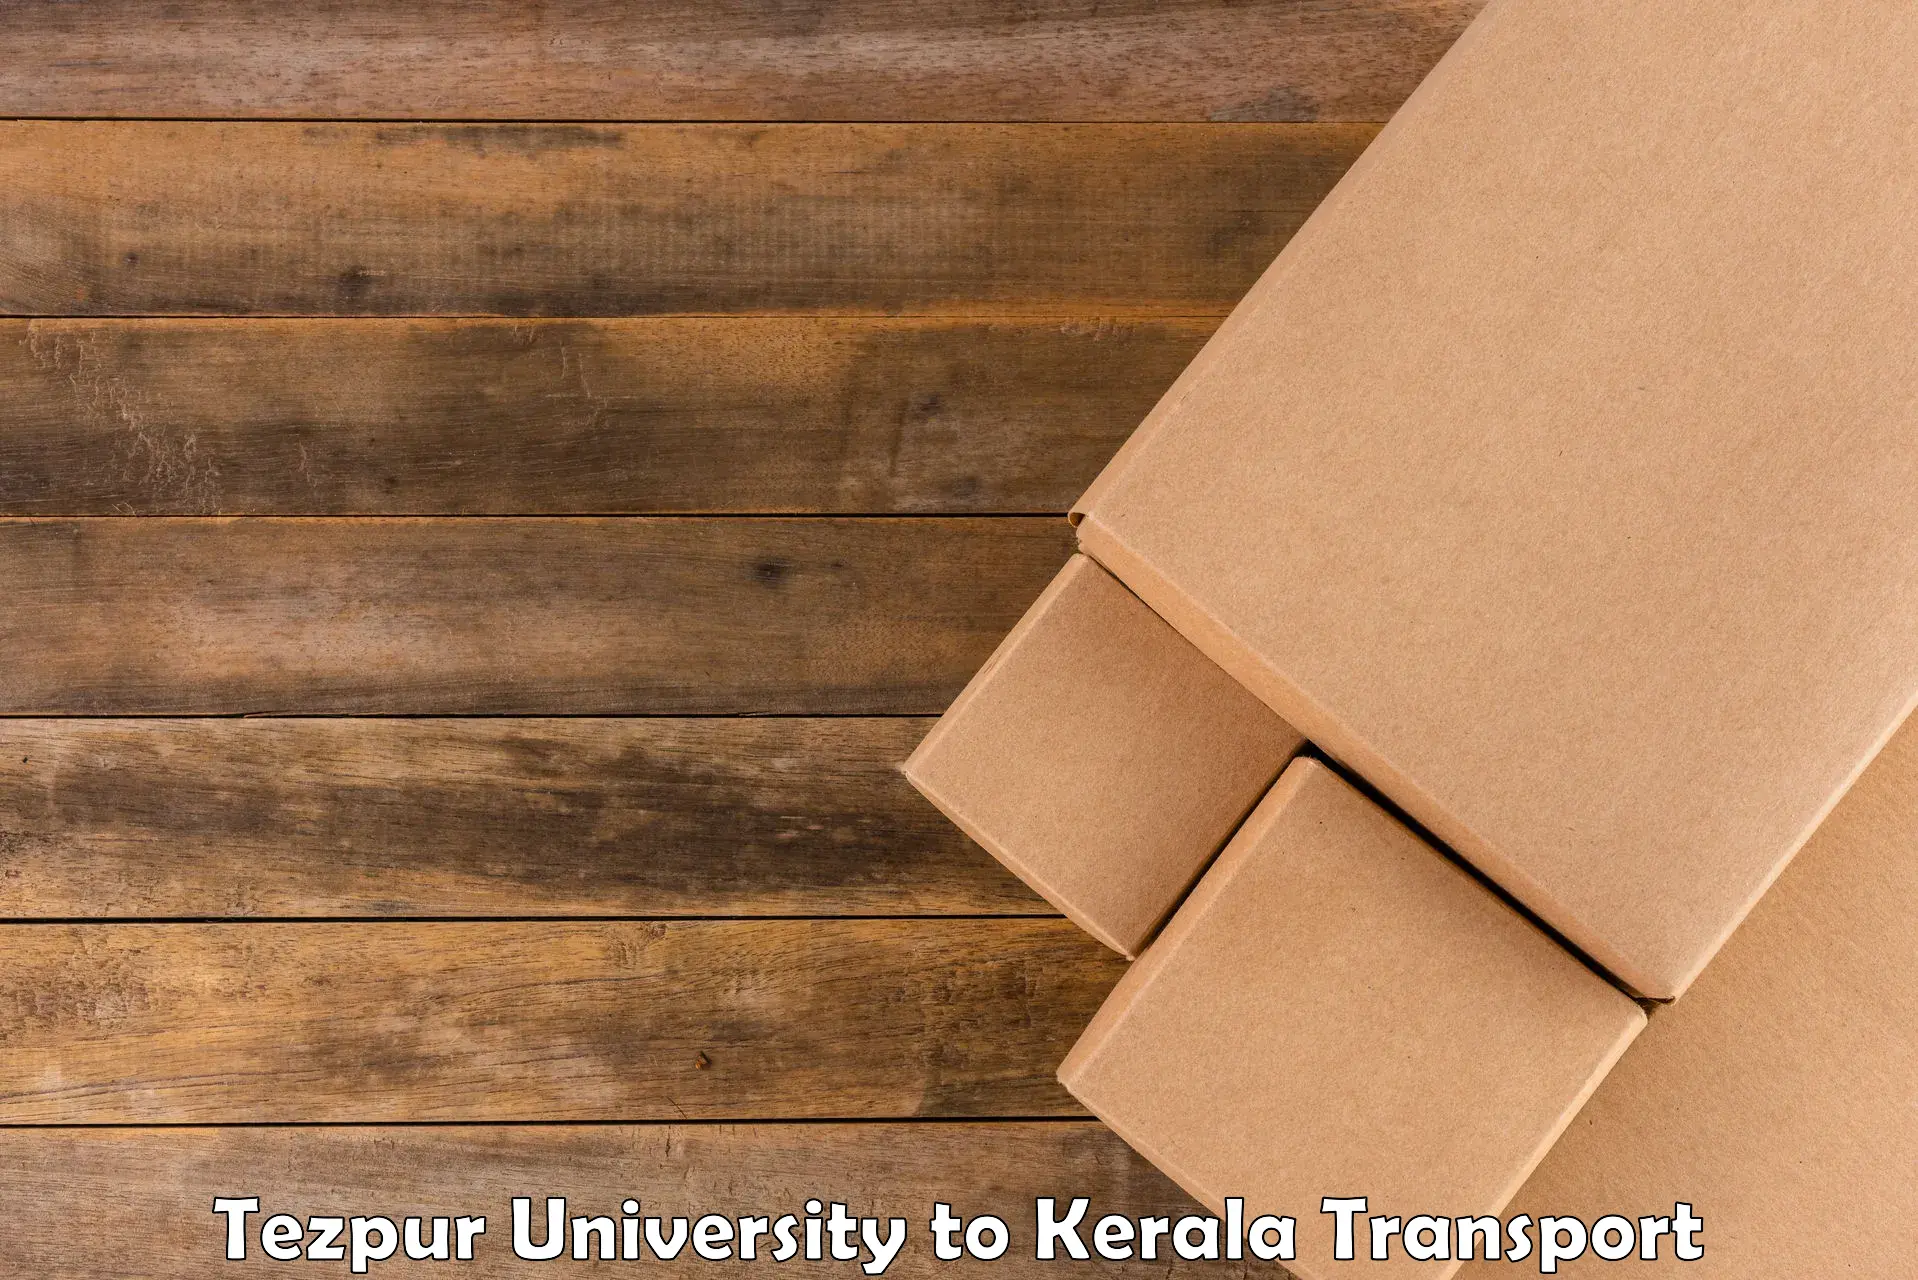 Shipping partner Tezpur University to Cochin University of Science and Technology